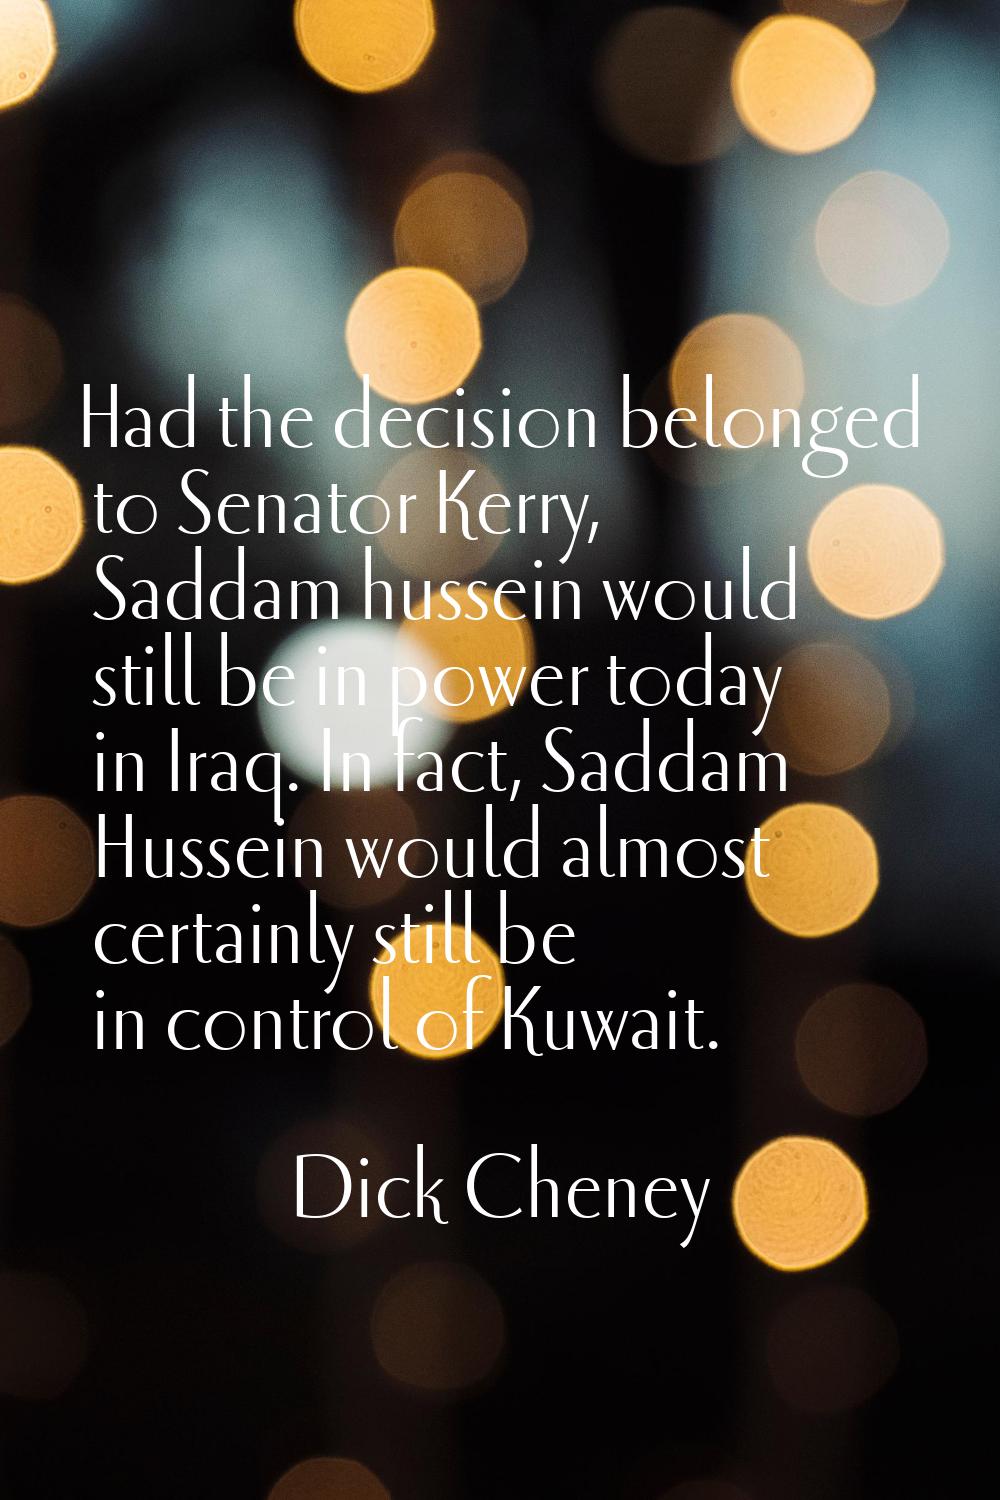 Had the decision belonged to Senator Kerry, Saddam hussein would still be in power today in Iraq. I